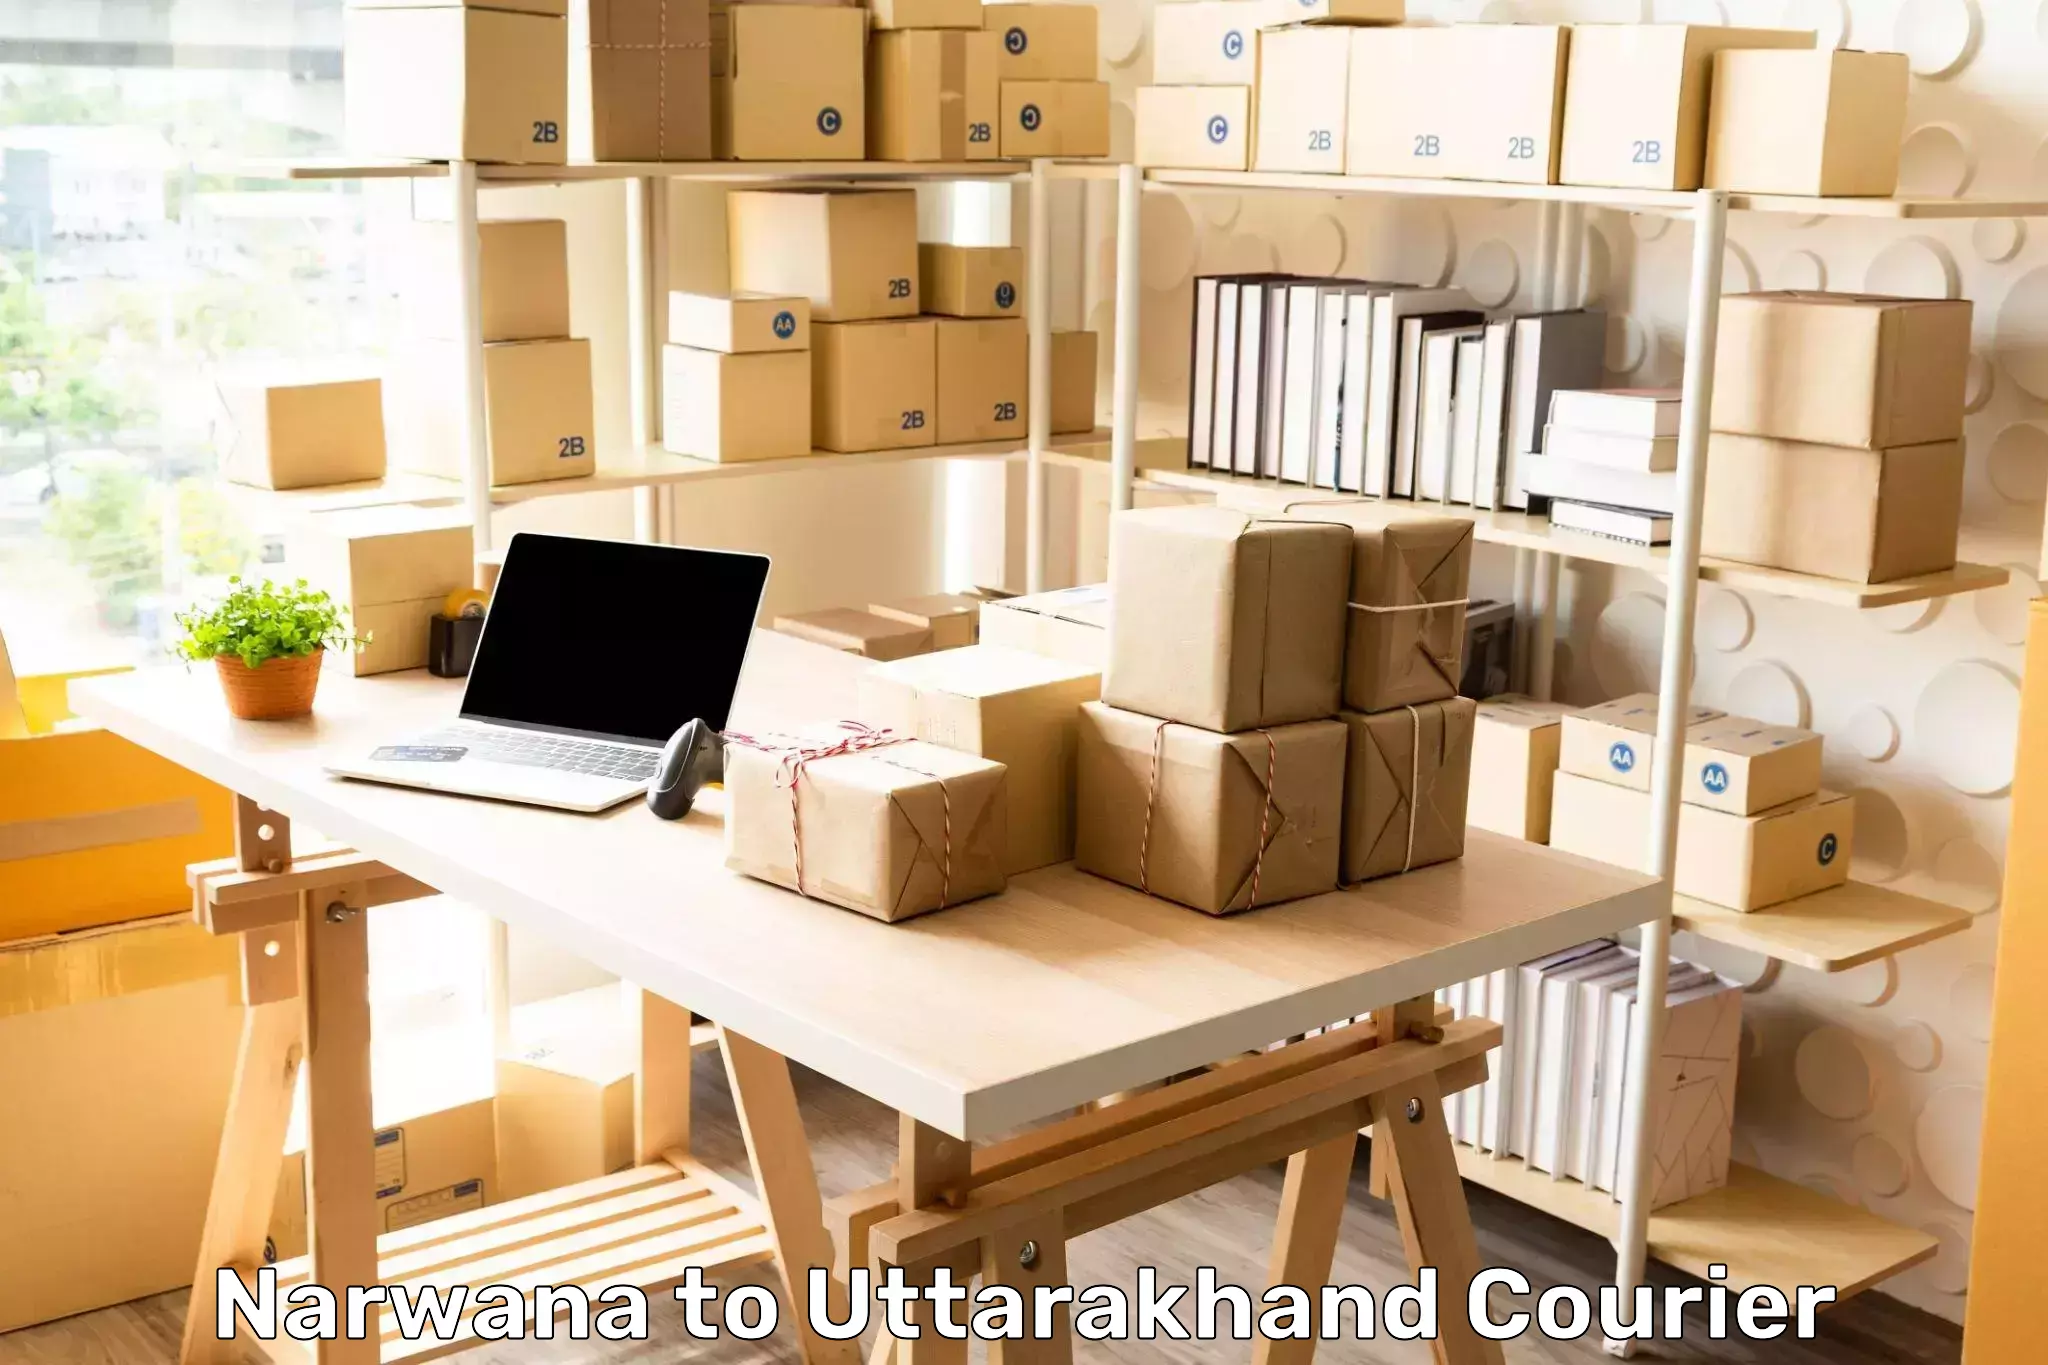 State-of-the-art courier technology Narwana to Udham Singh Nagar